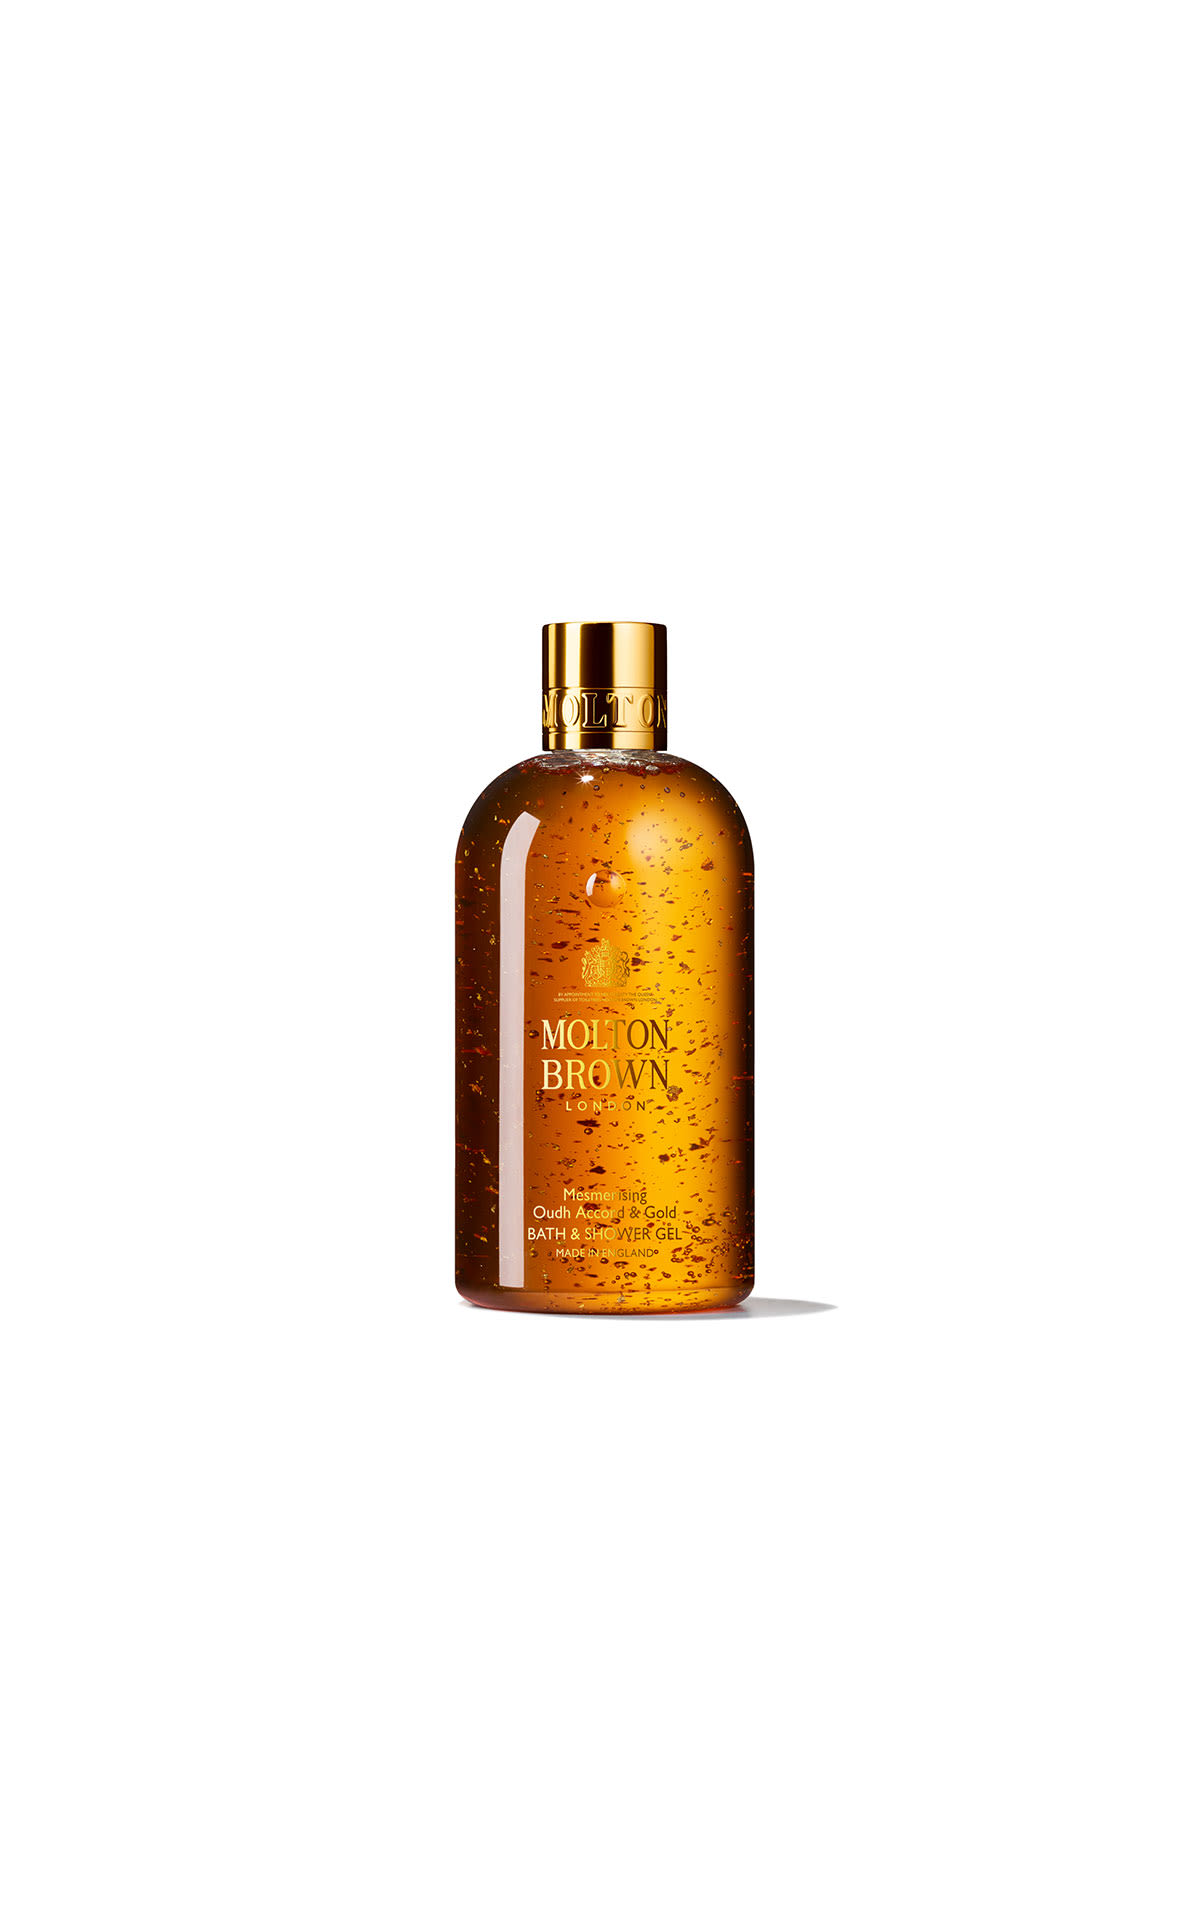 Molton Brown Oudh accord and gold body wash from Bicester Village